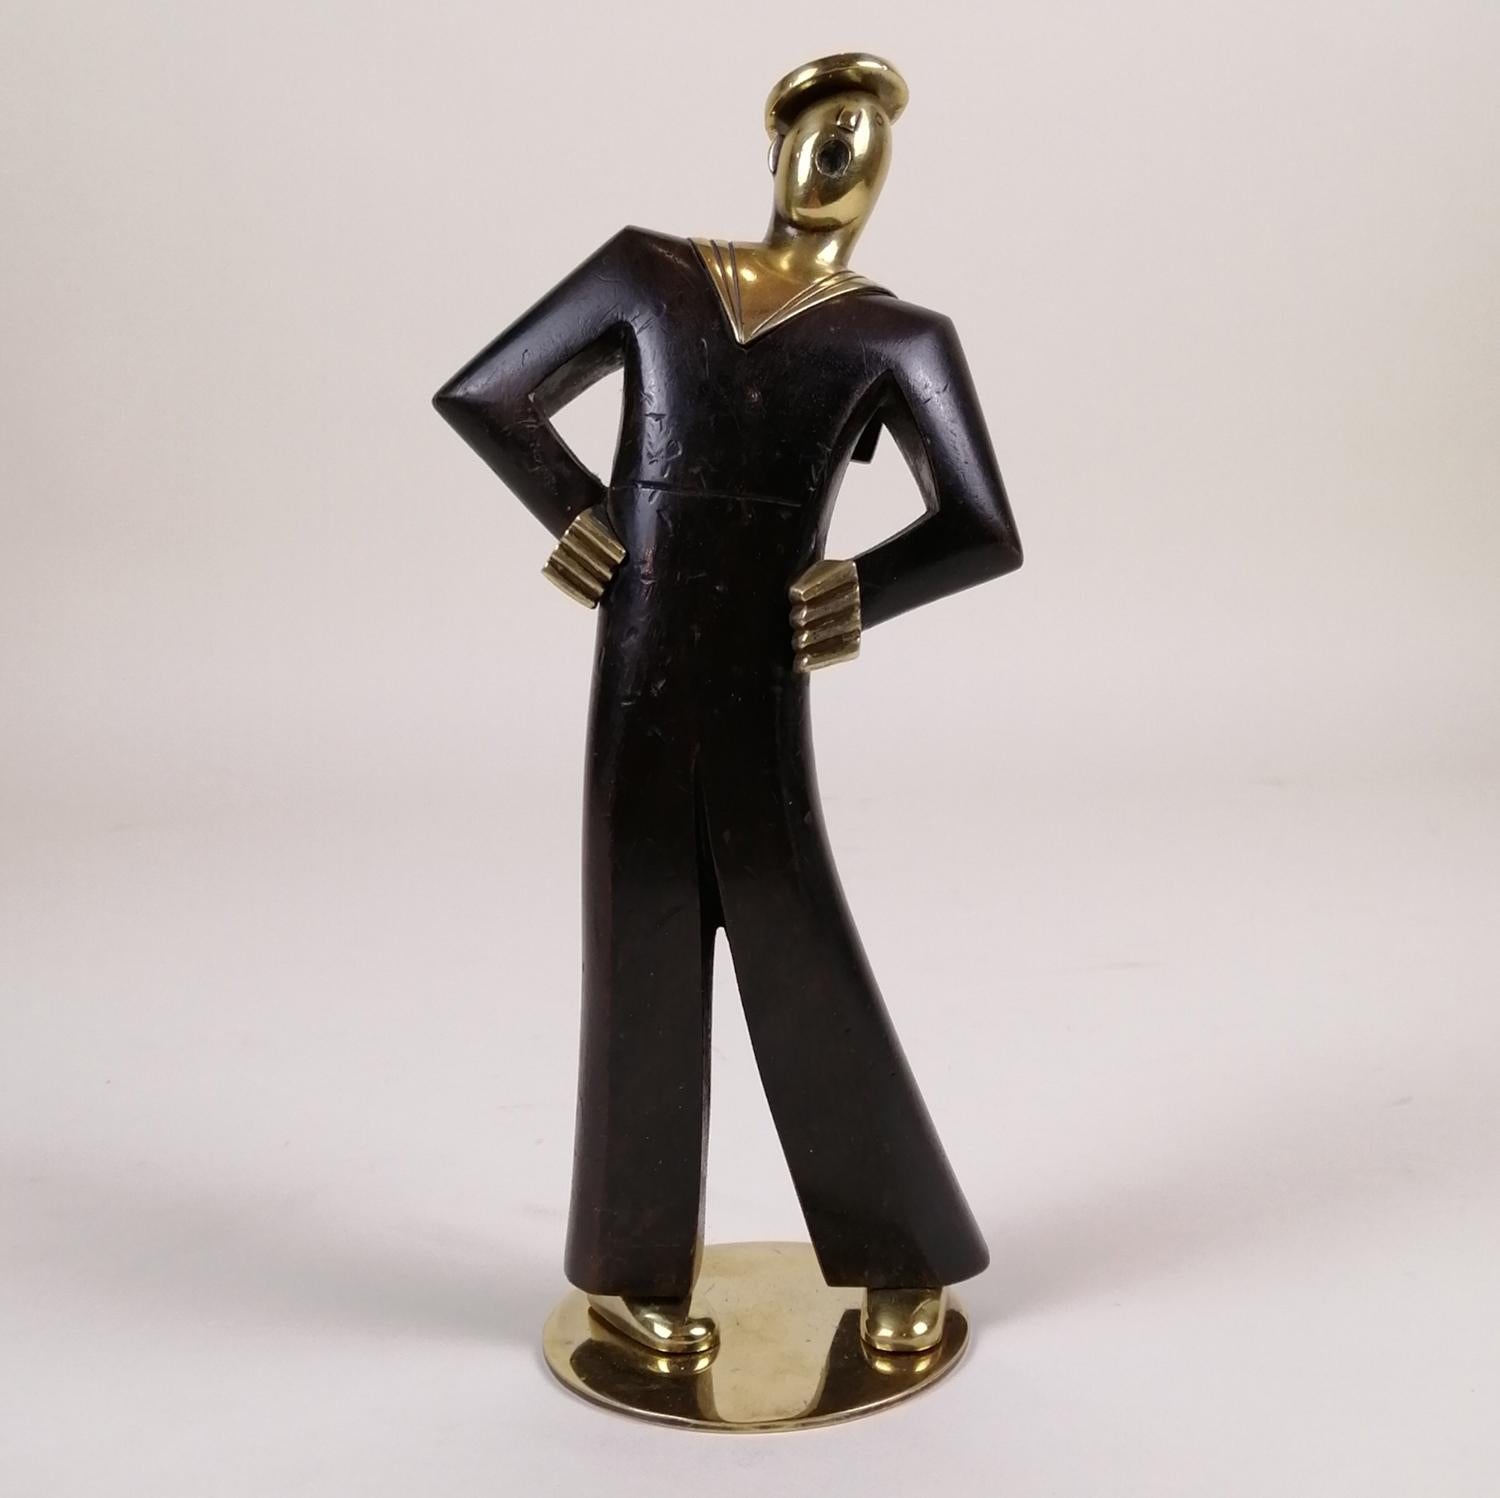 A 1930's Austrian ebonized wood and brass singing sailor. The sailor has wood body and brass head, hands and feet. Sealed on the bottom.